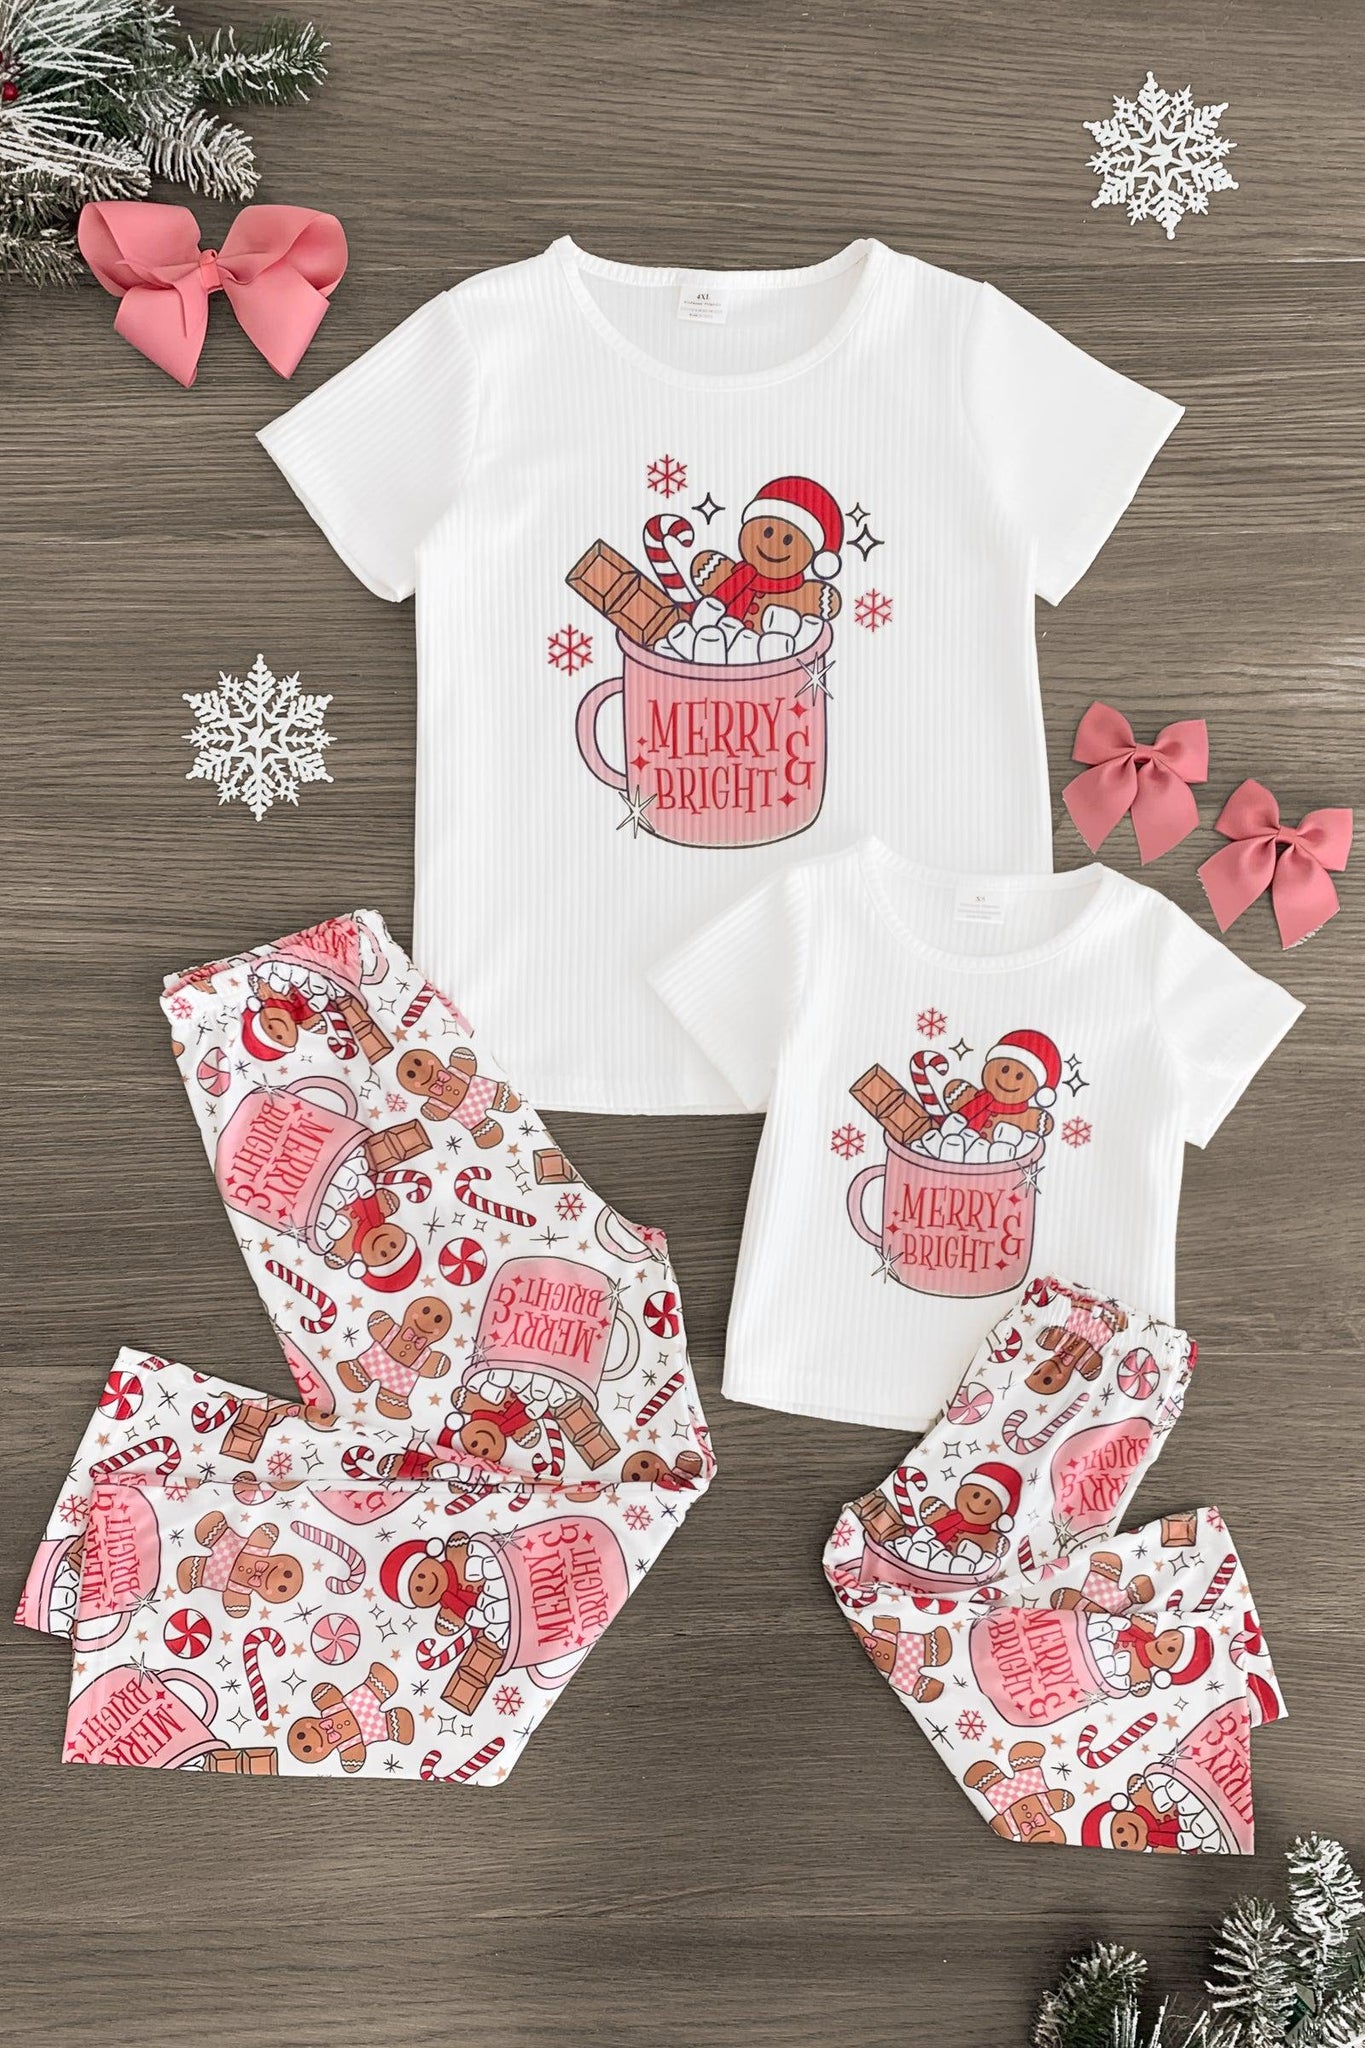 Mom & Me - "Merry & Bright" Gingerbread Man Pajamas - Sparkle in Pink